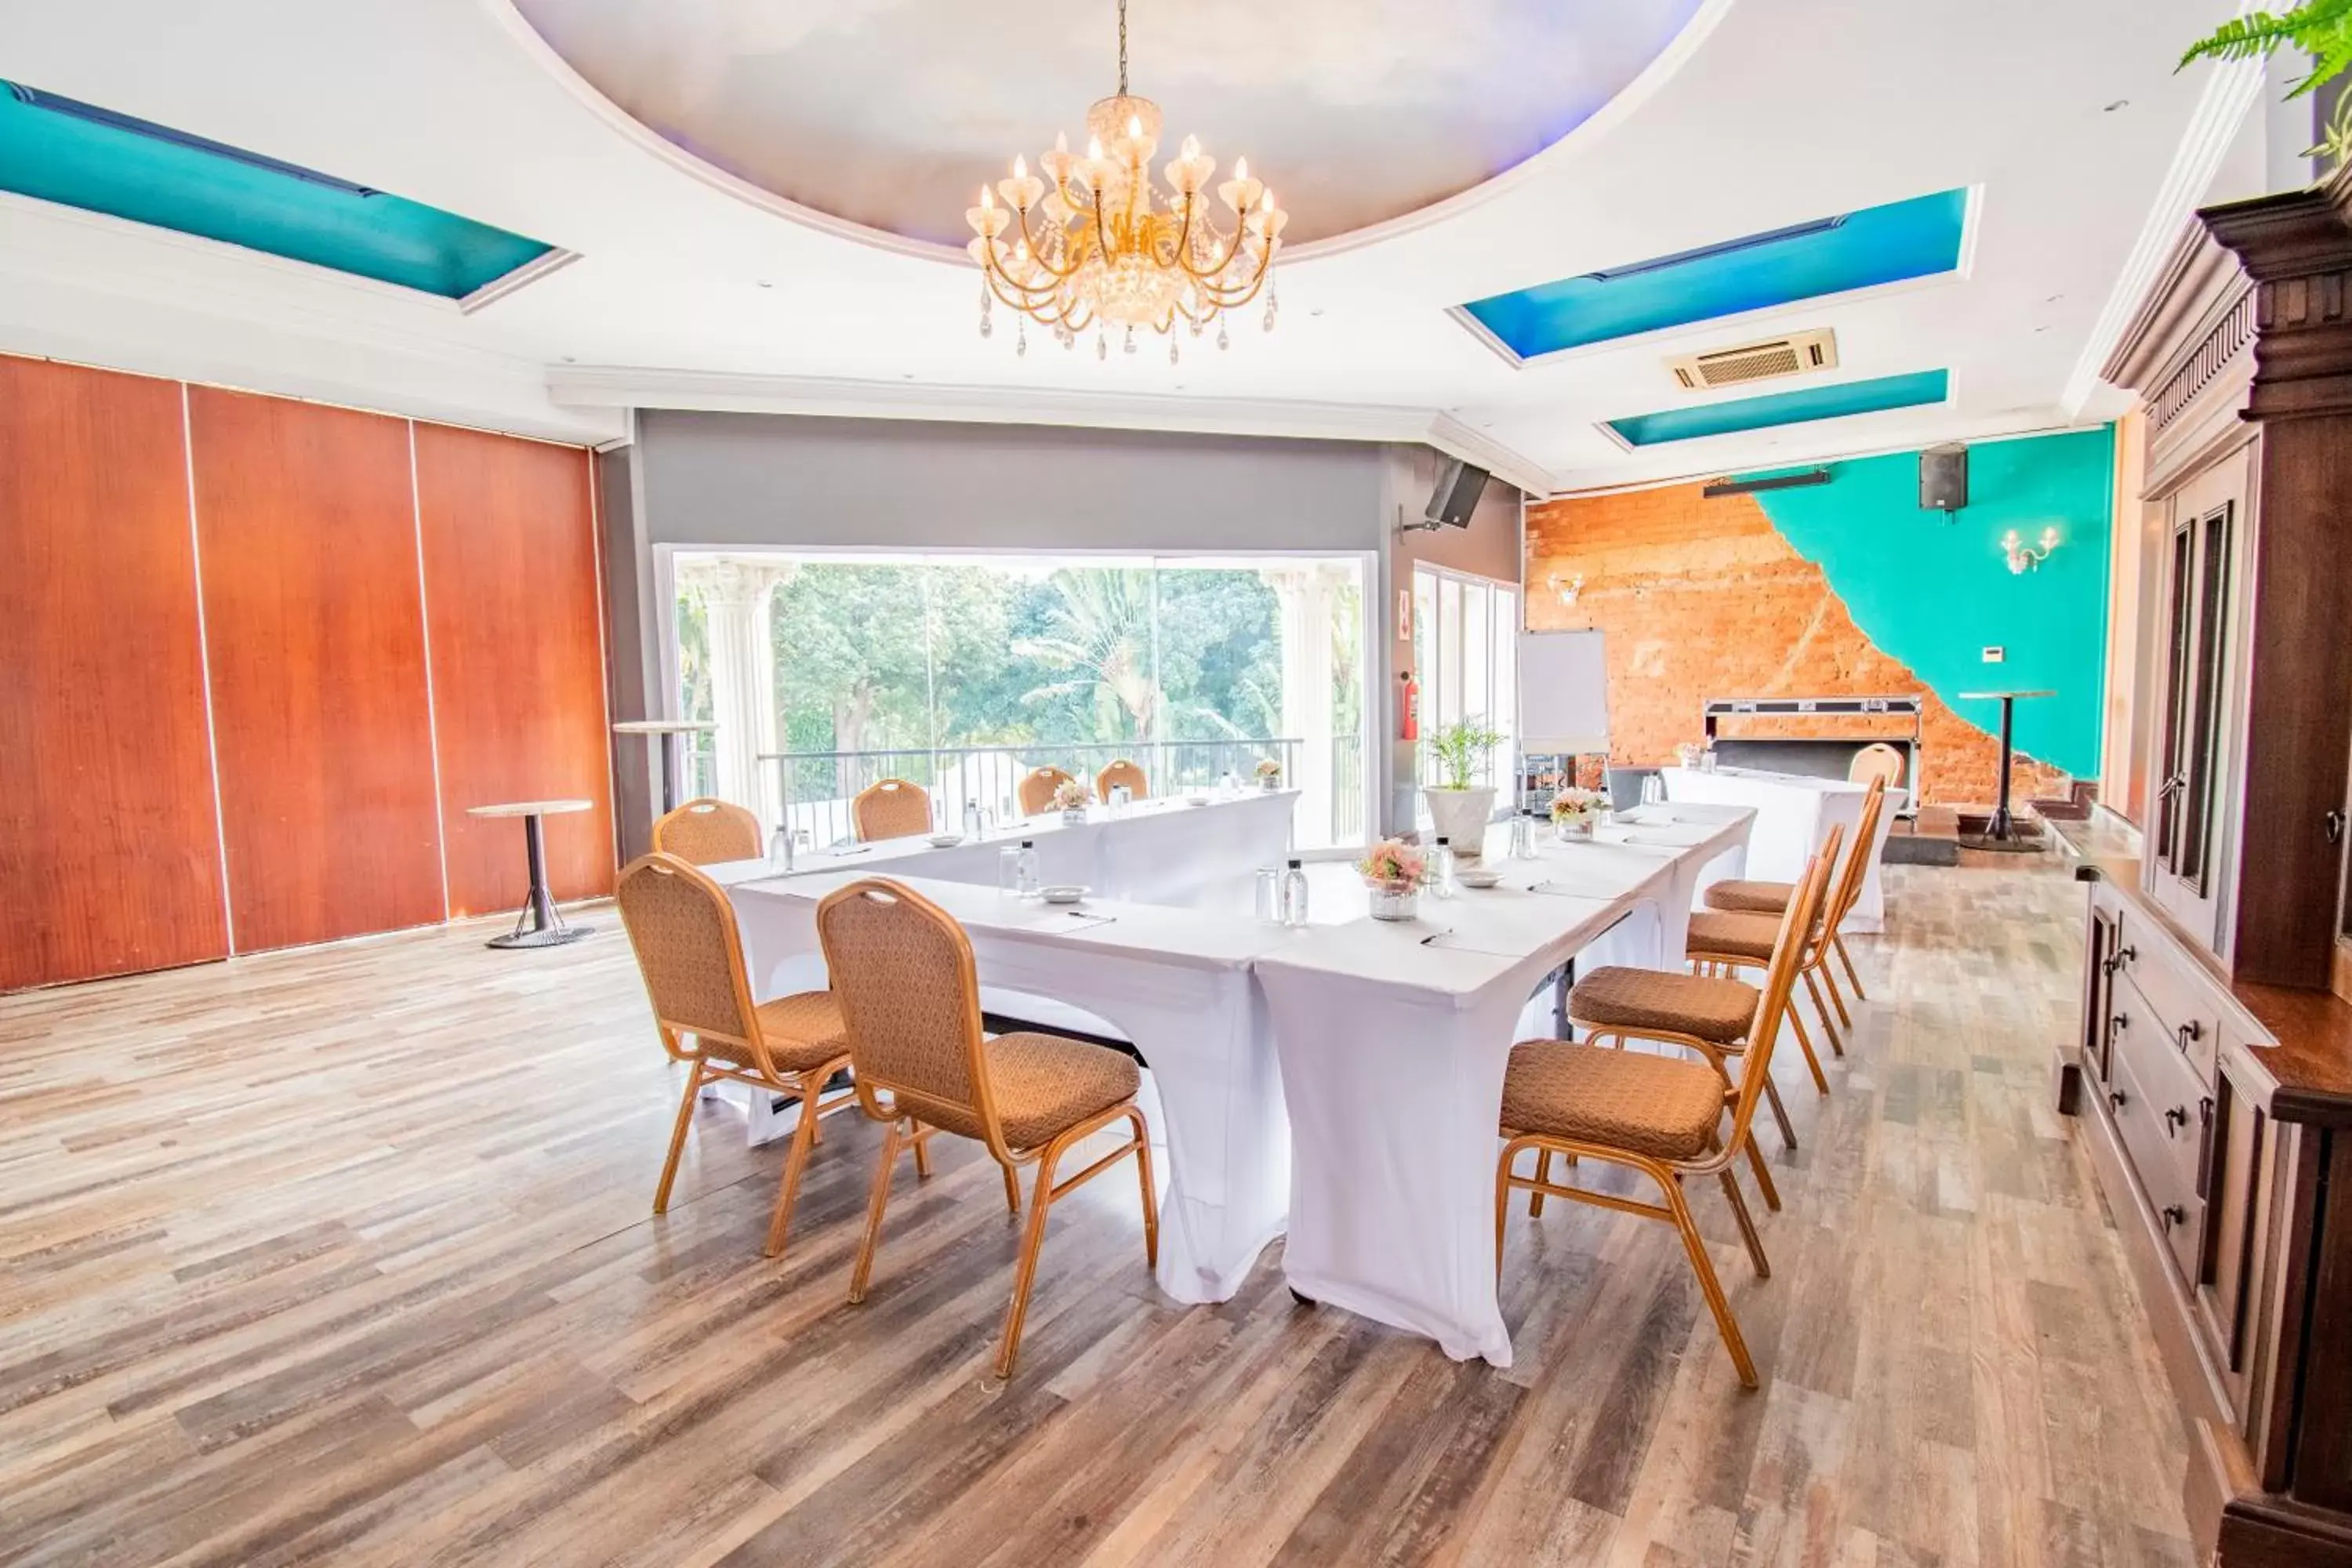 Meeting/conference room in Emakhosini Boutique Hotel